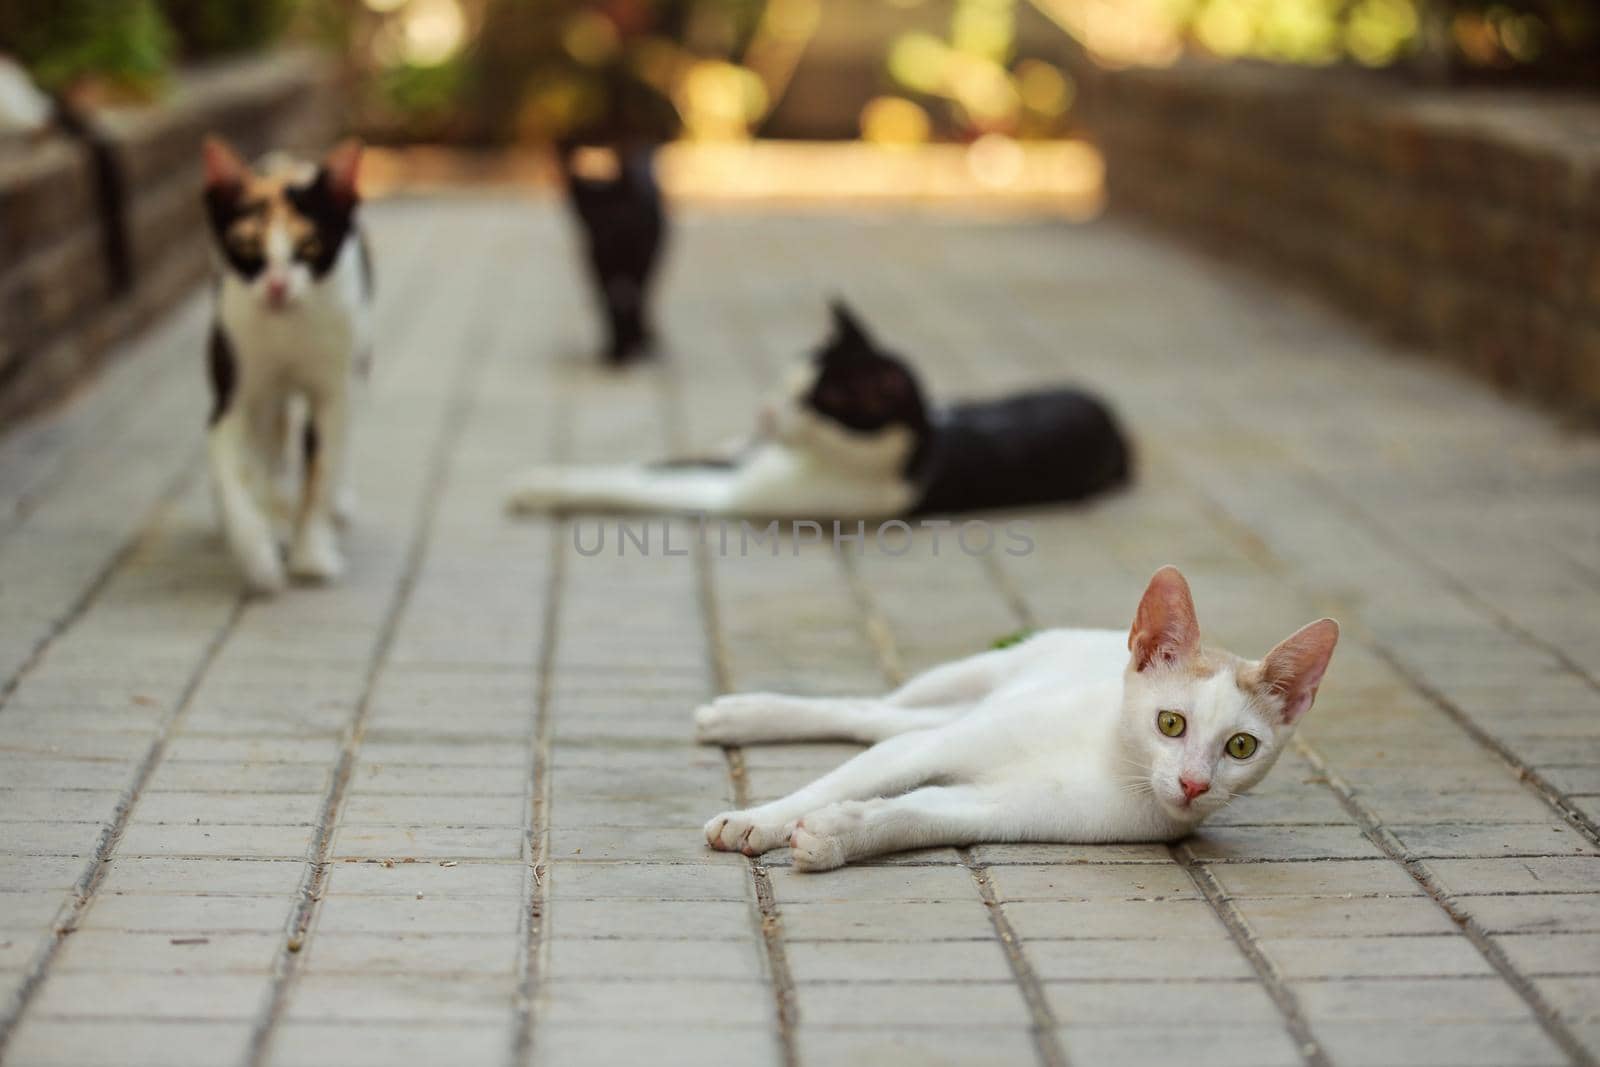 White stray cat laying on concrete pavement in hotel resort, more cats in background.